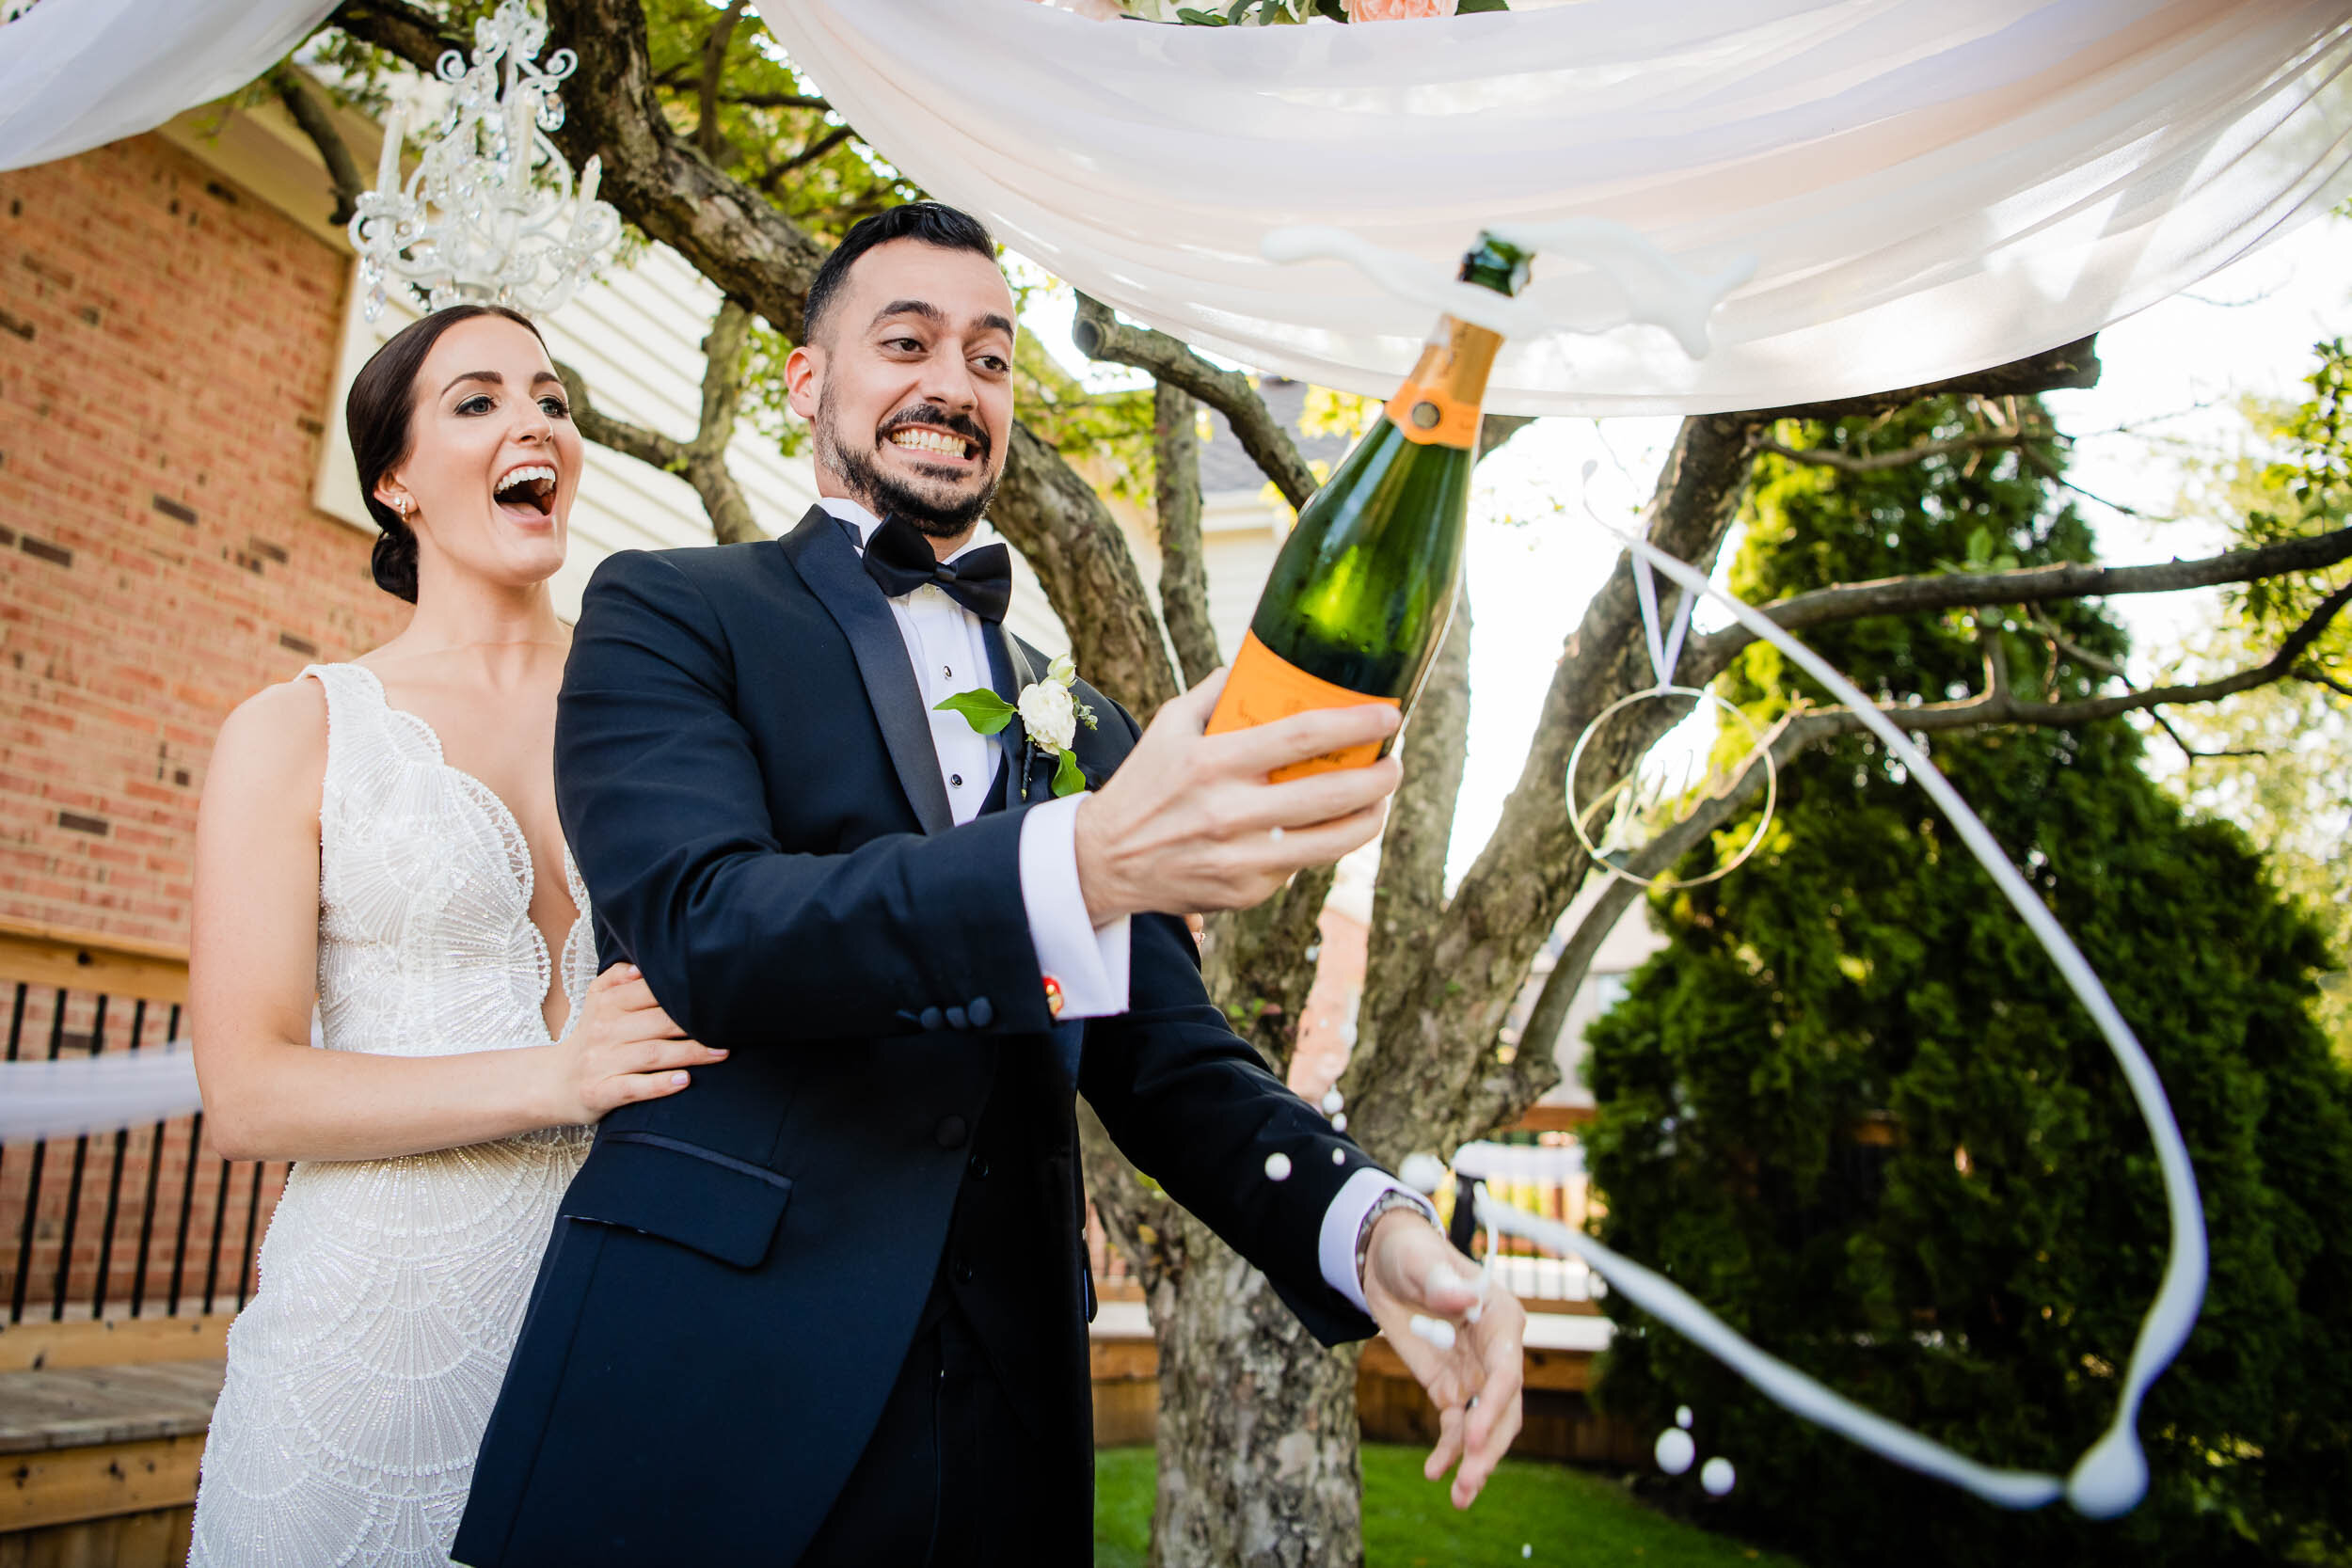 Bride and groom pop champagne after their wedding ceremony:  Chicago wedding photography by J. Brown Photography.